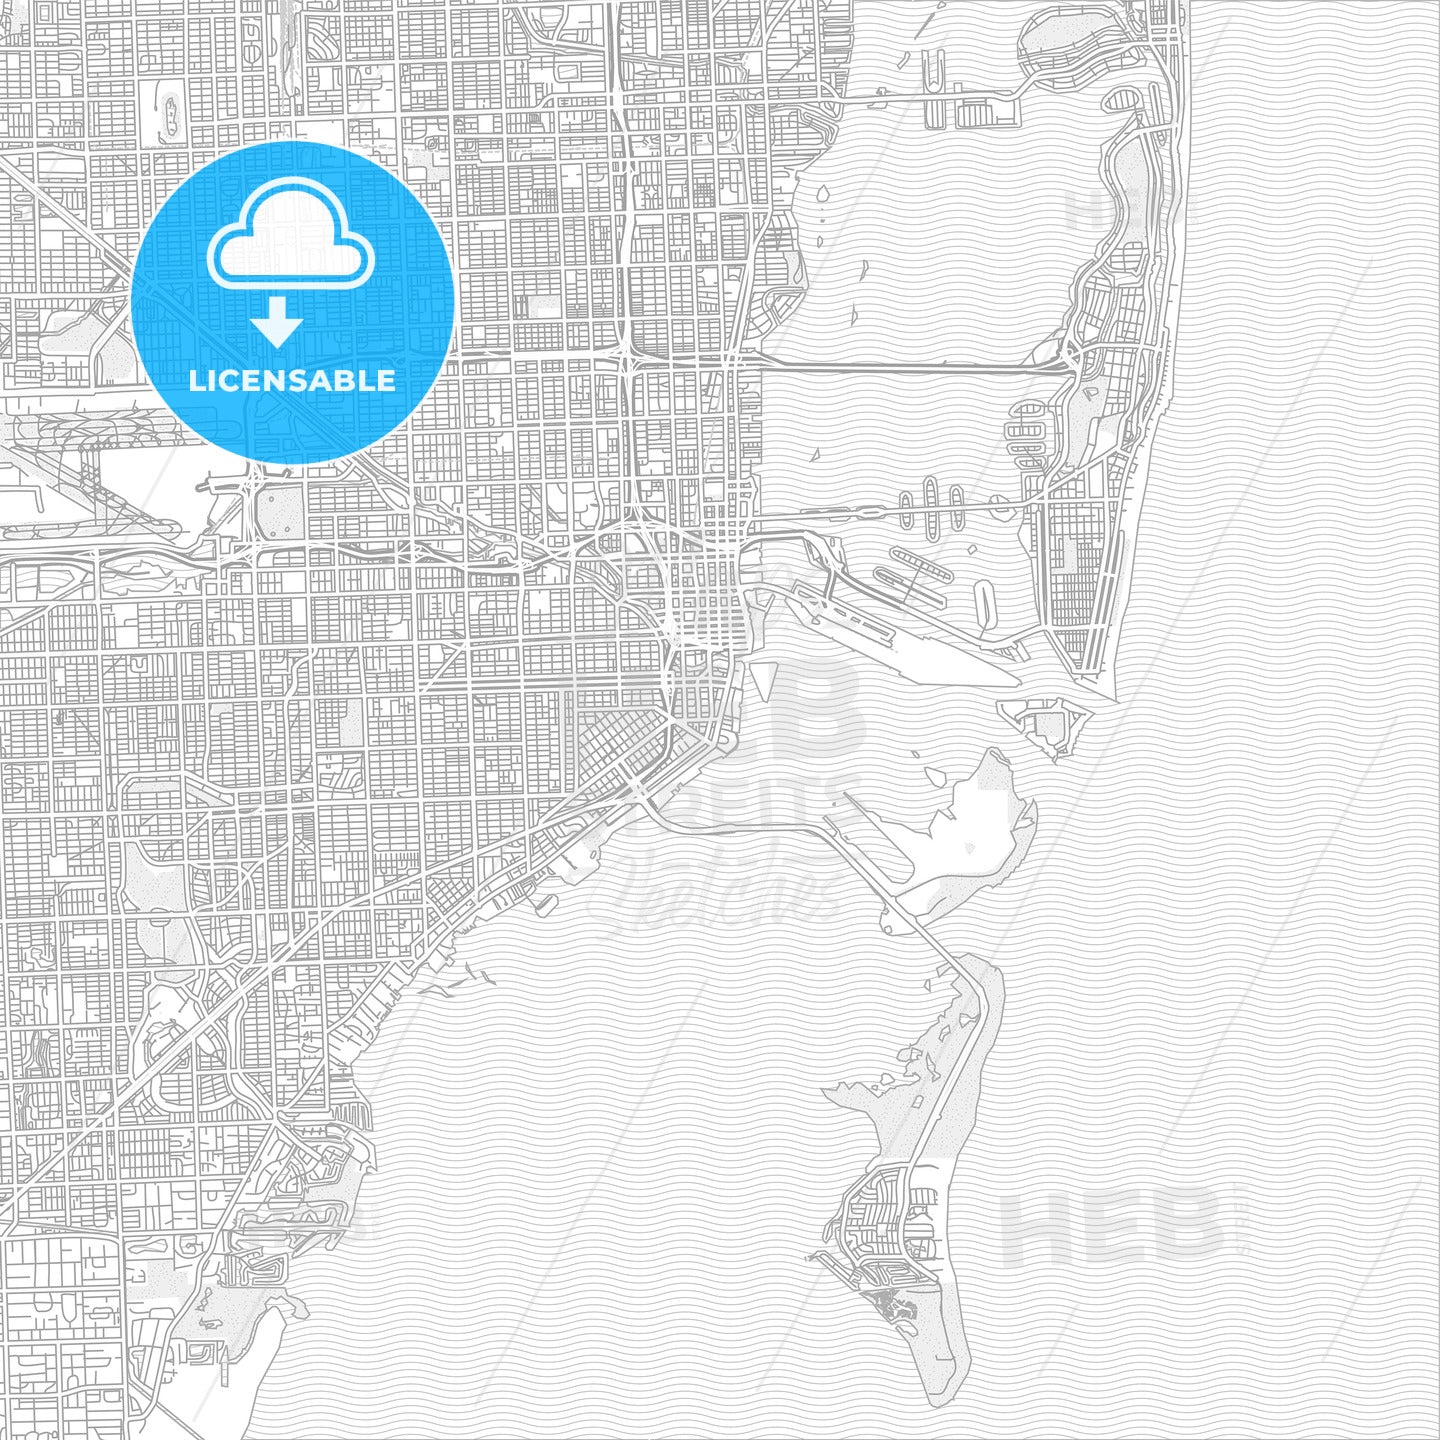 Miami, Florida, USA, bright outlined vector map